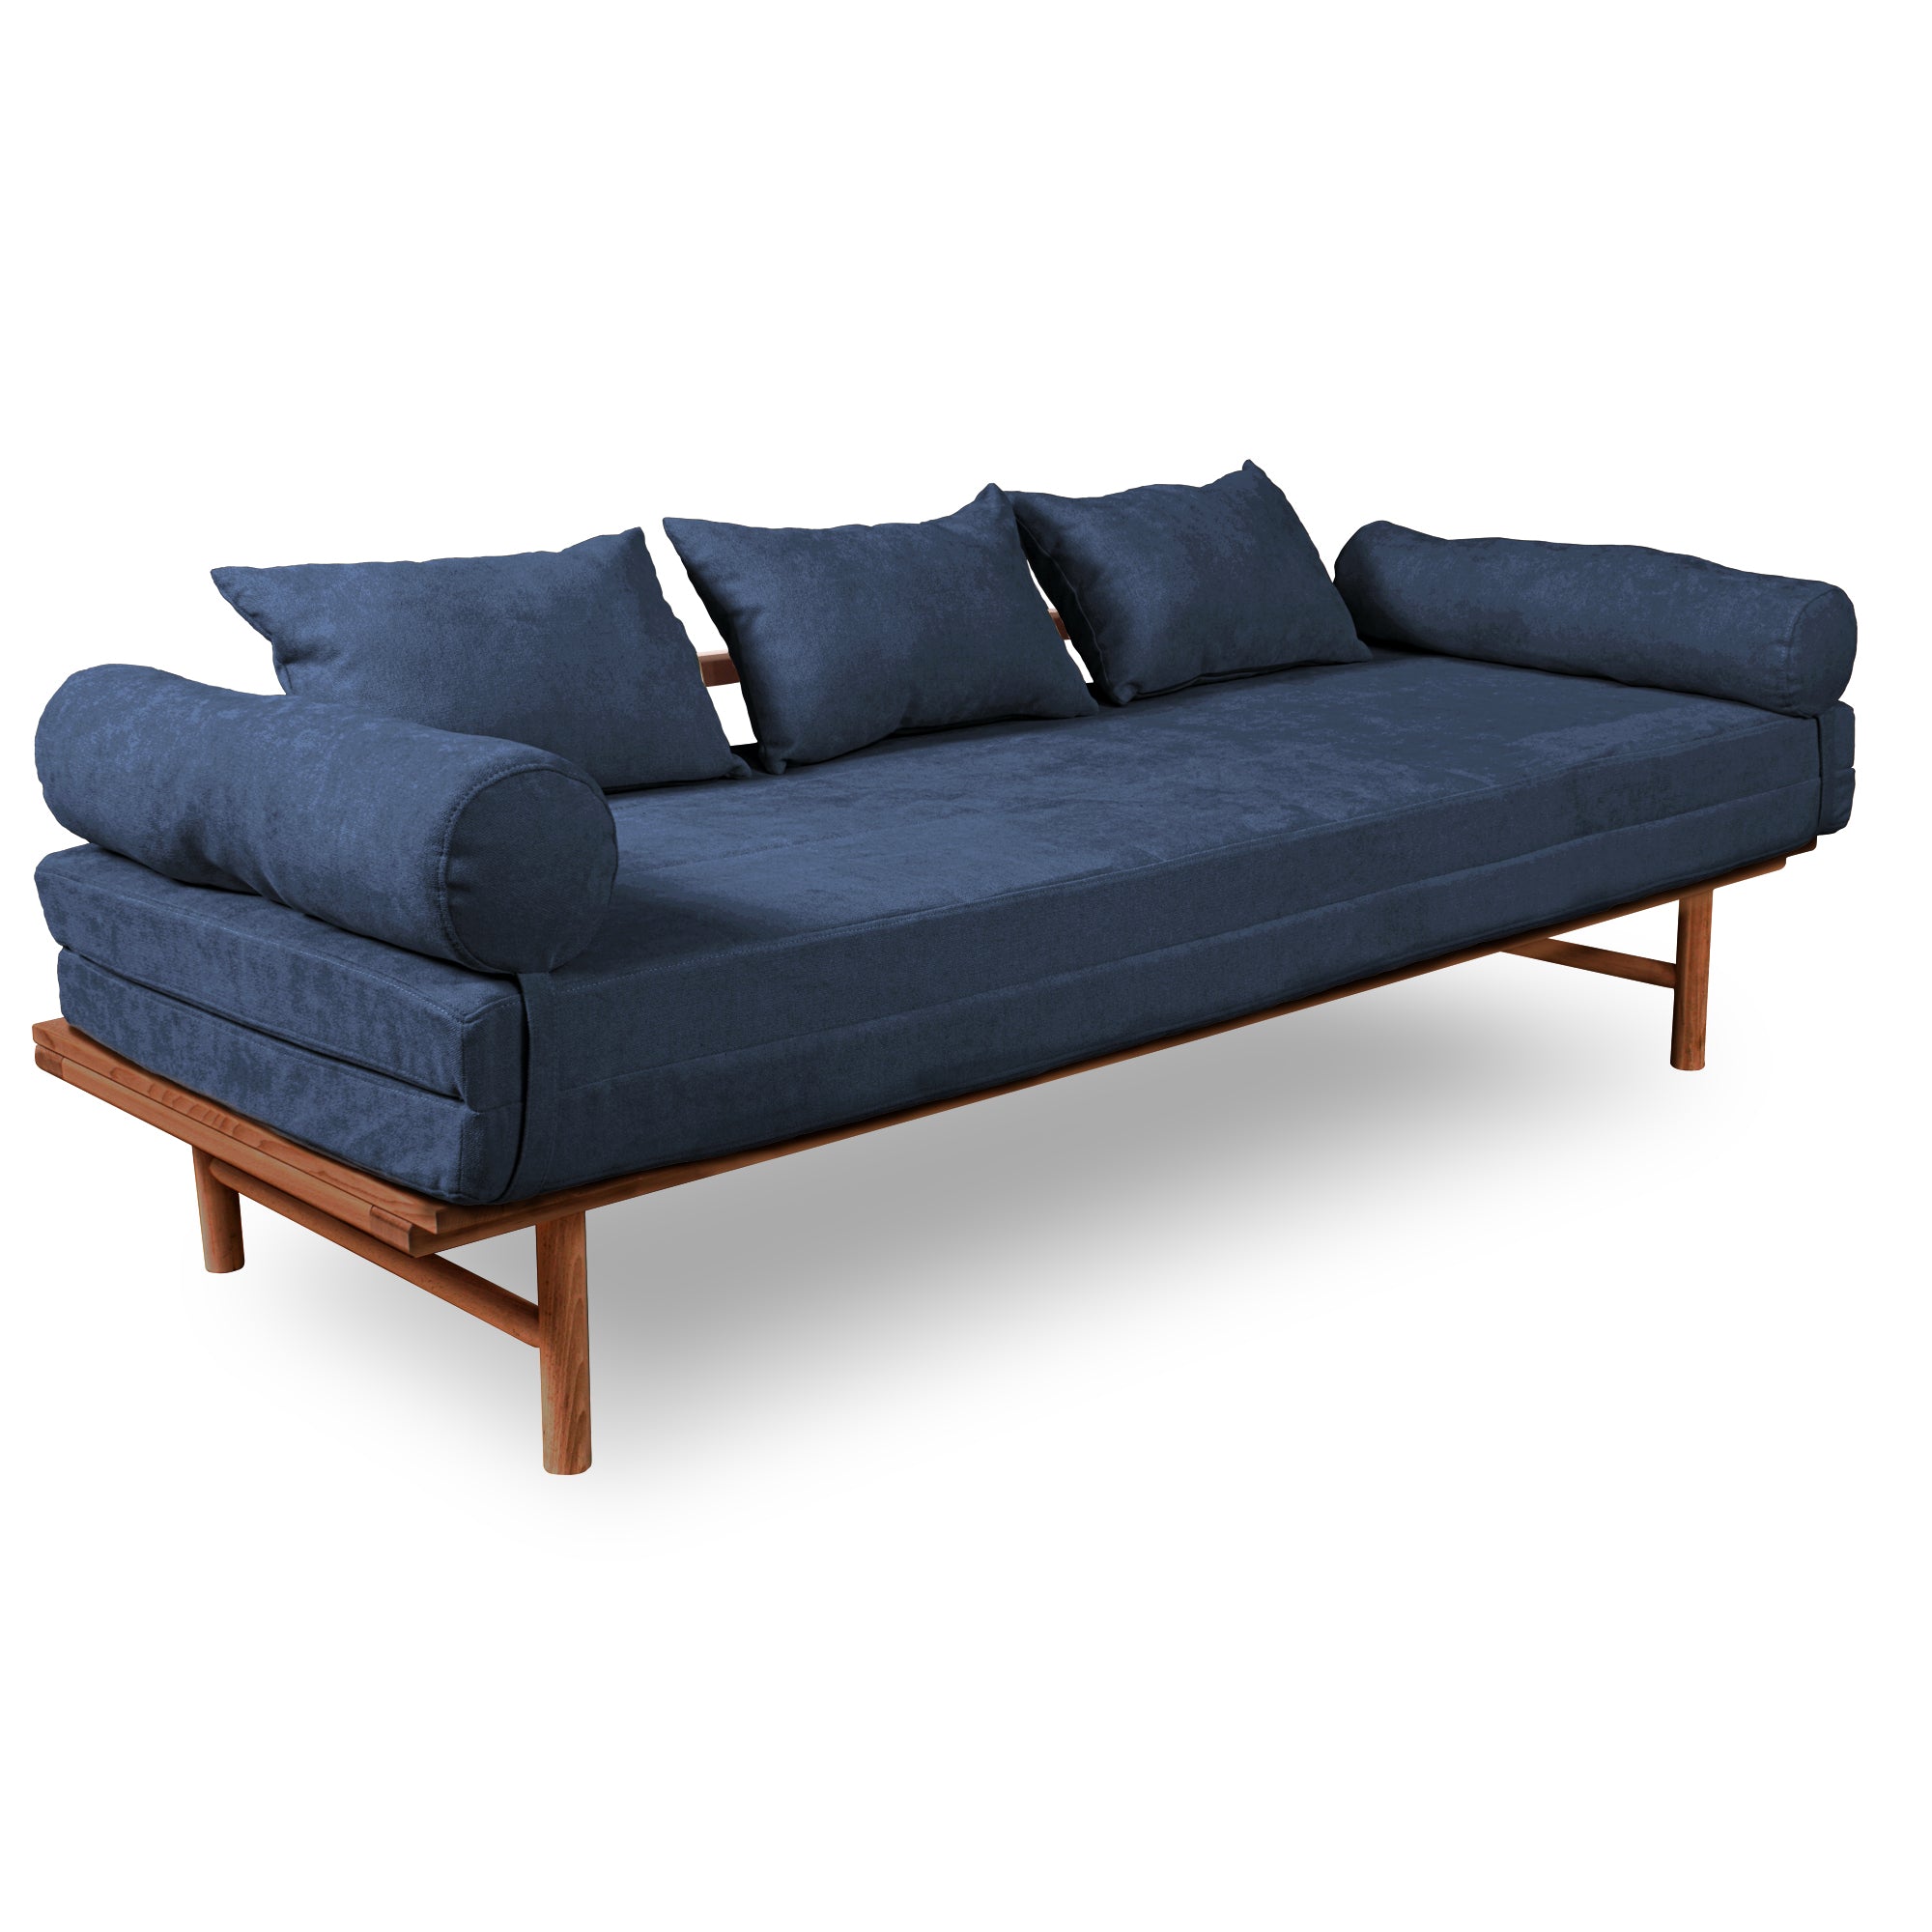 Le MAR Folding Daybed, Beech Wood Frame, Caramel Colour-blue upholstery